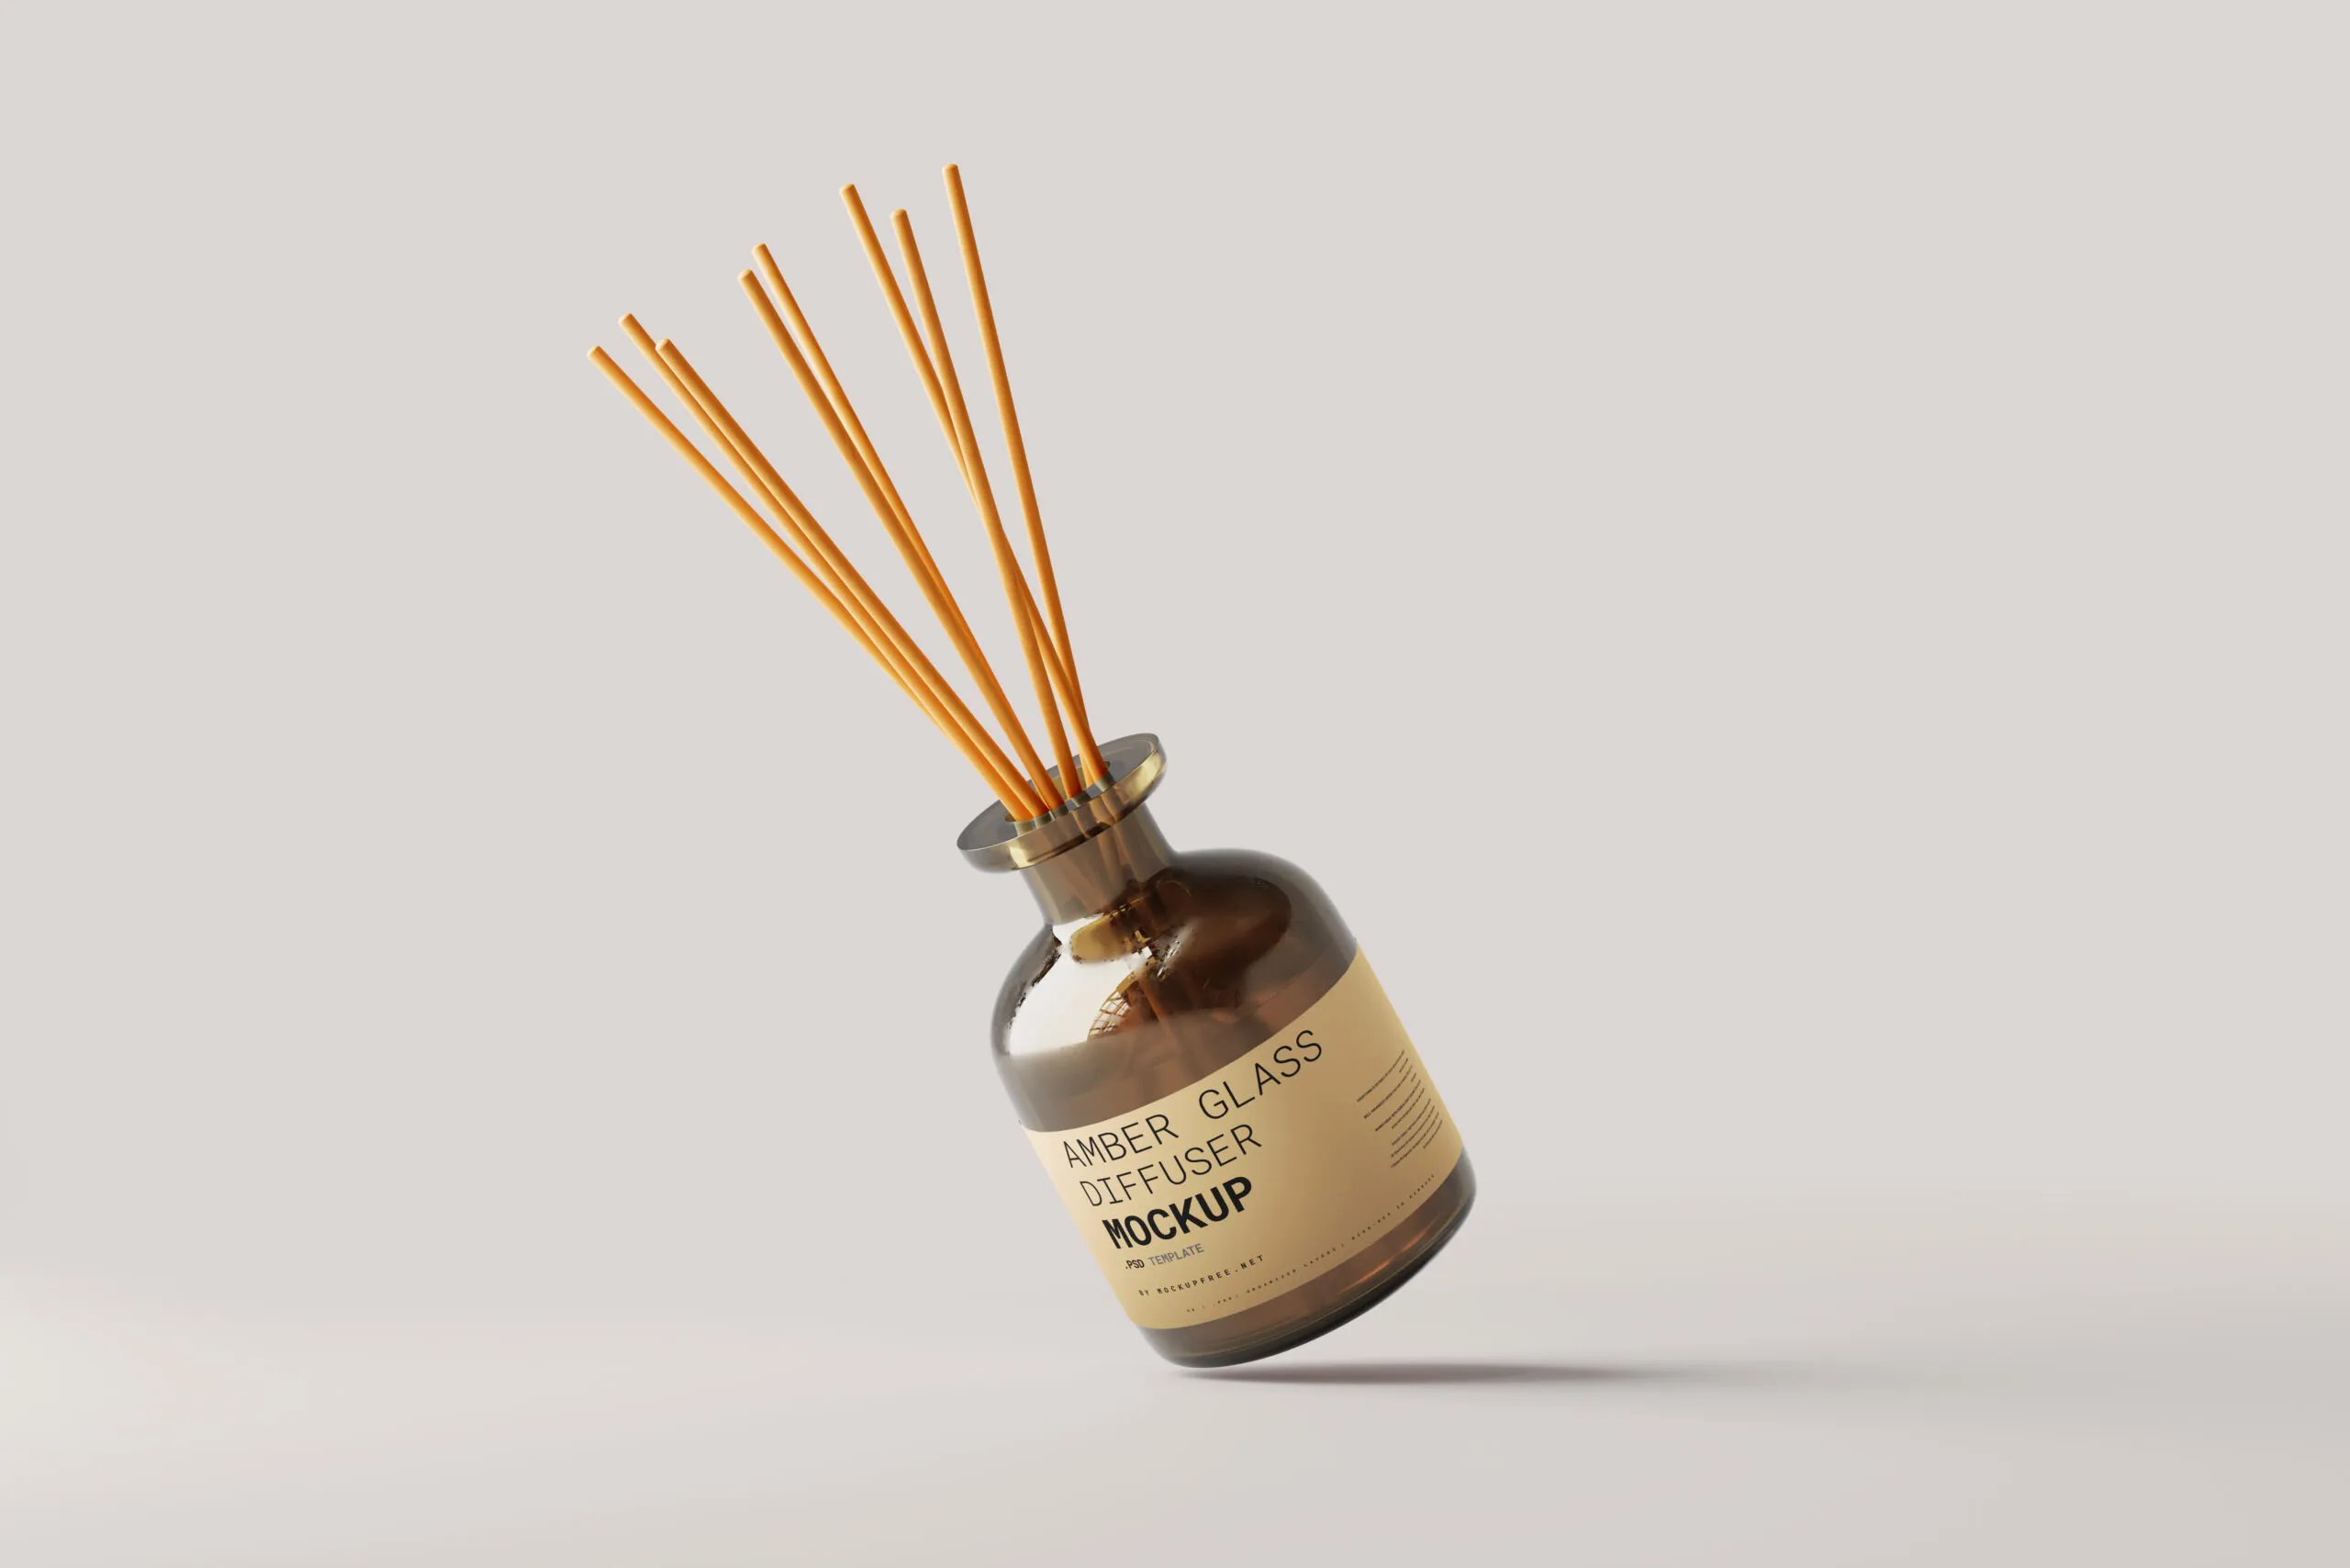 5 Amber Glass Reed Diffuser Mockups with Reeds FREE PSD